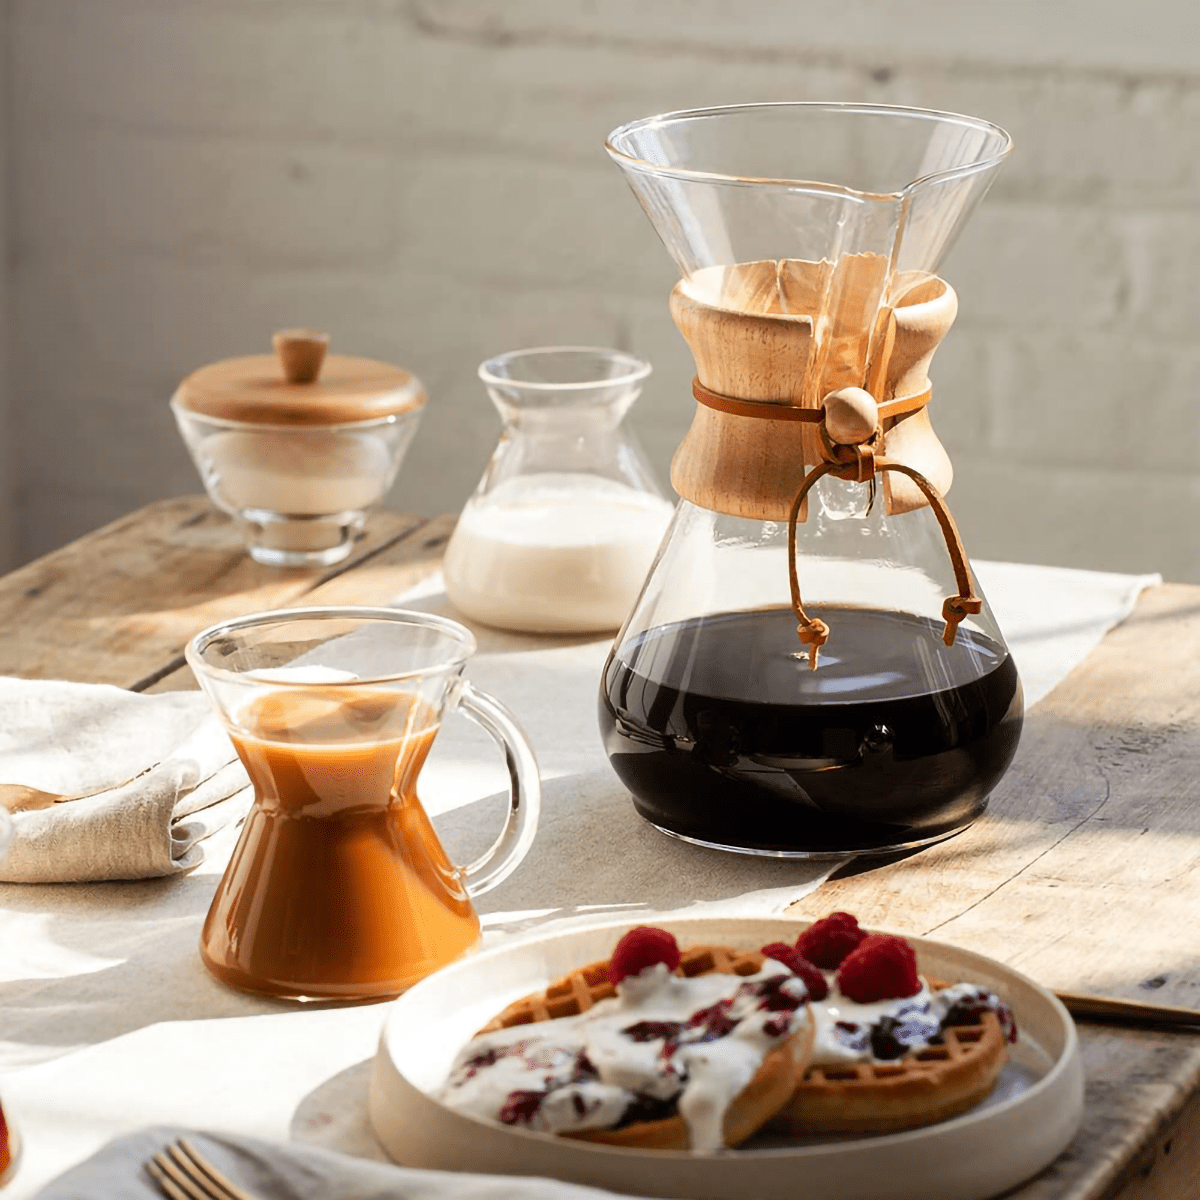 Best Pour Over Coffee Maker - Product Comparisons Are Here!